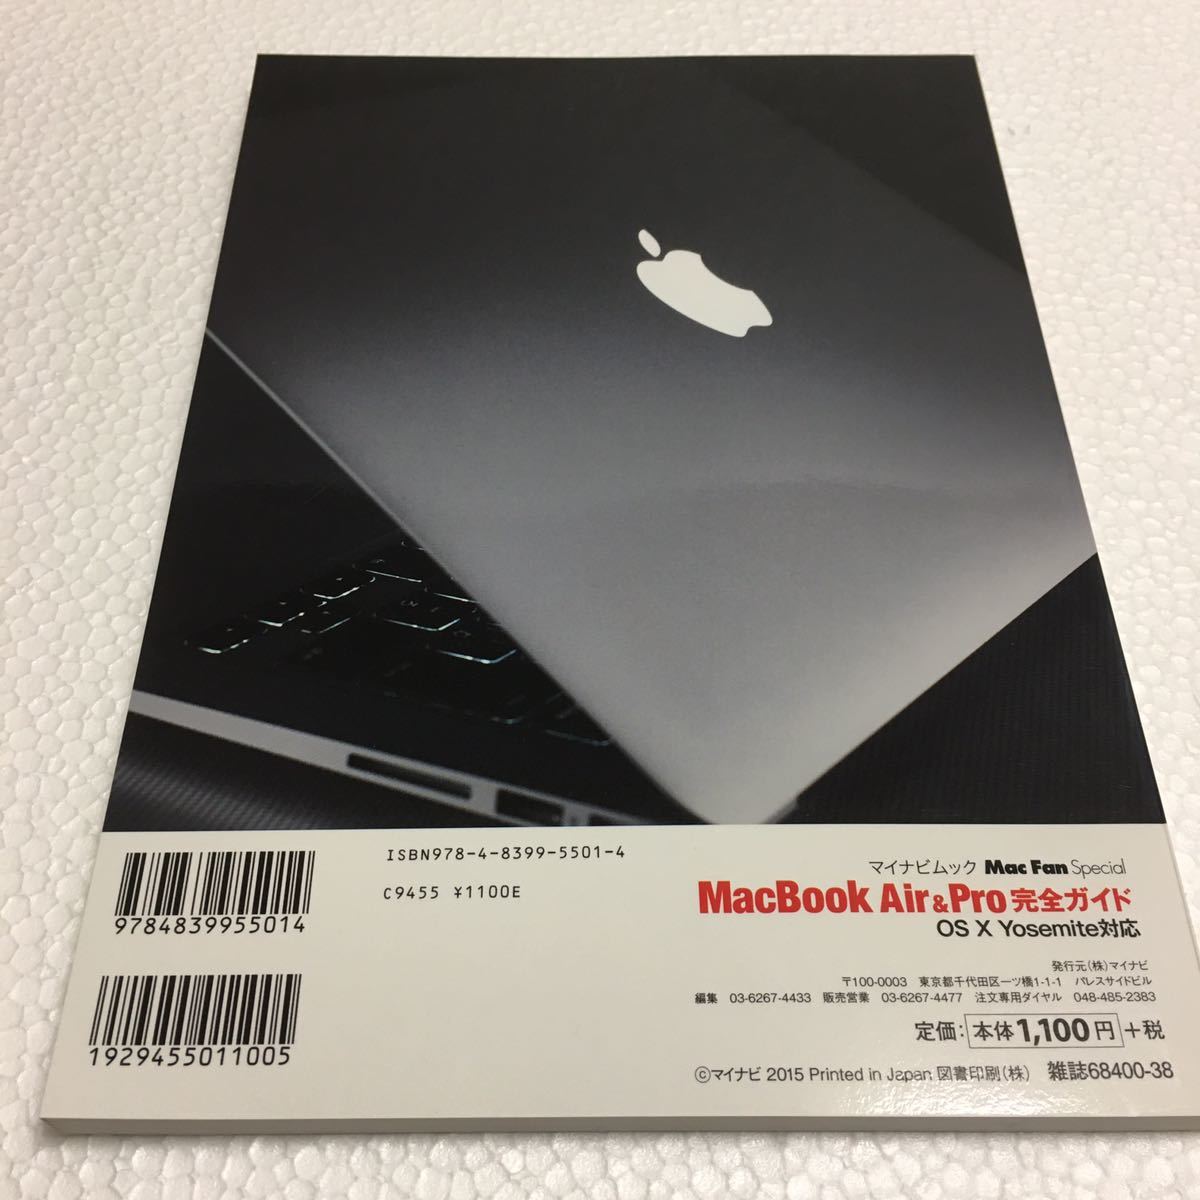  prompt decision Yu-Mail flight only free shipping Mac Fan Special MacBook Air & Pro complete guide OS X Yosemite correspondence JAN-9784839955014